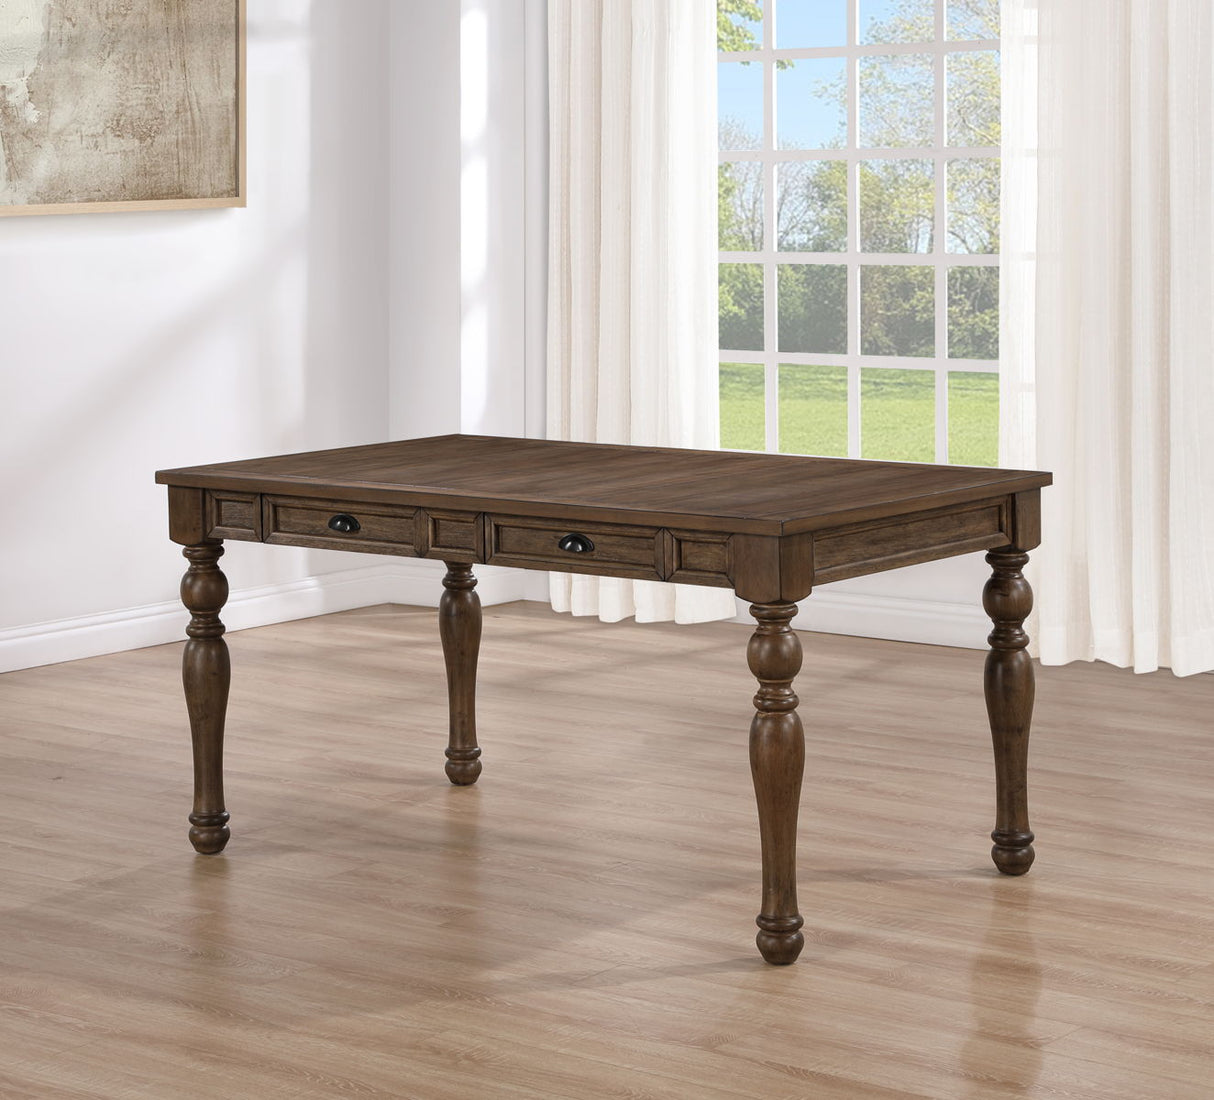 Joanna - 4 Drawer Dining Table - Brown